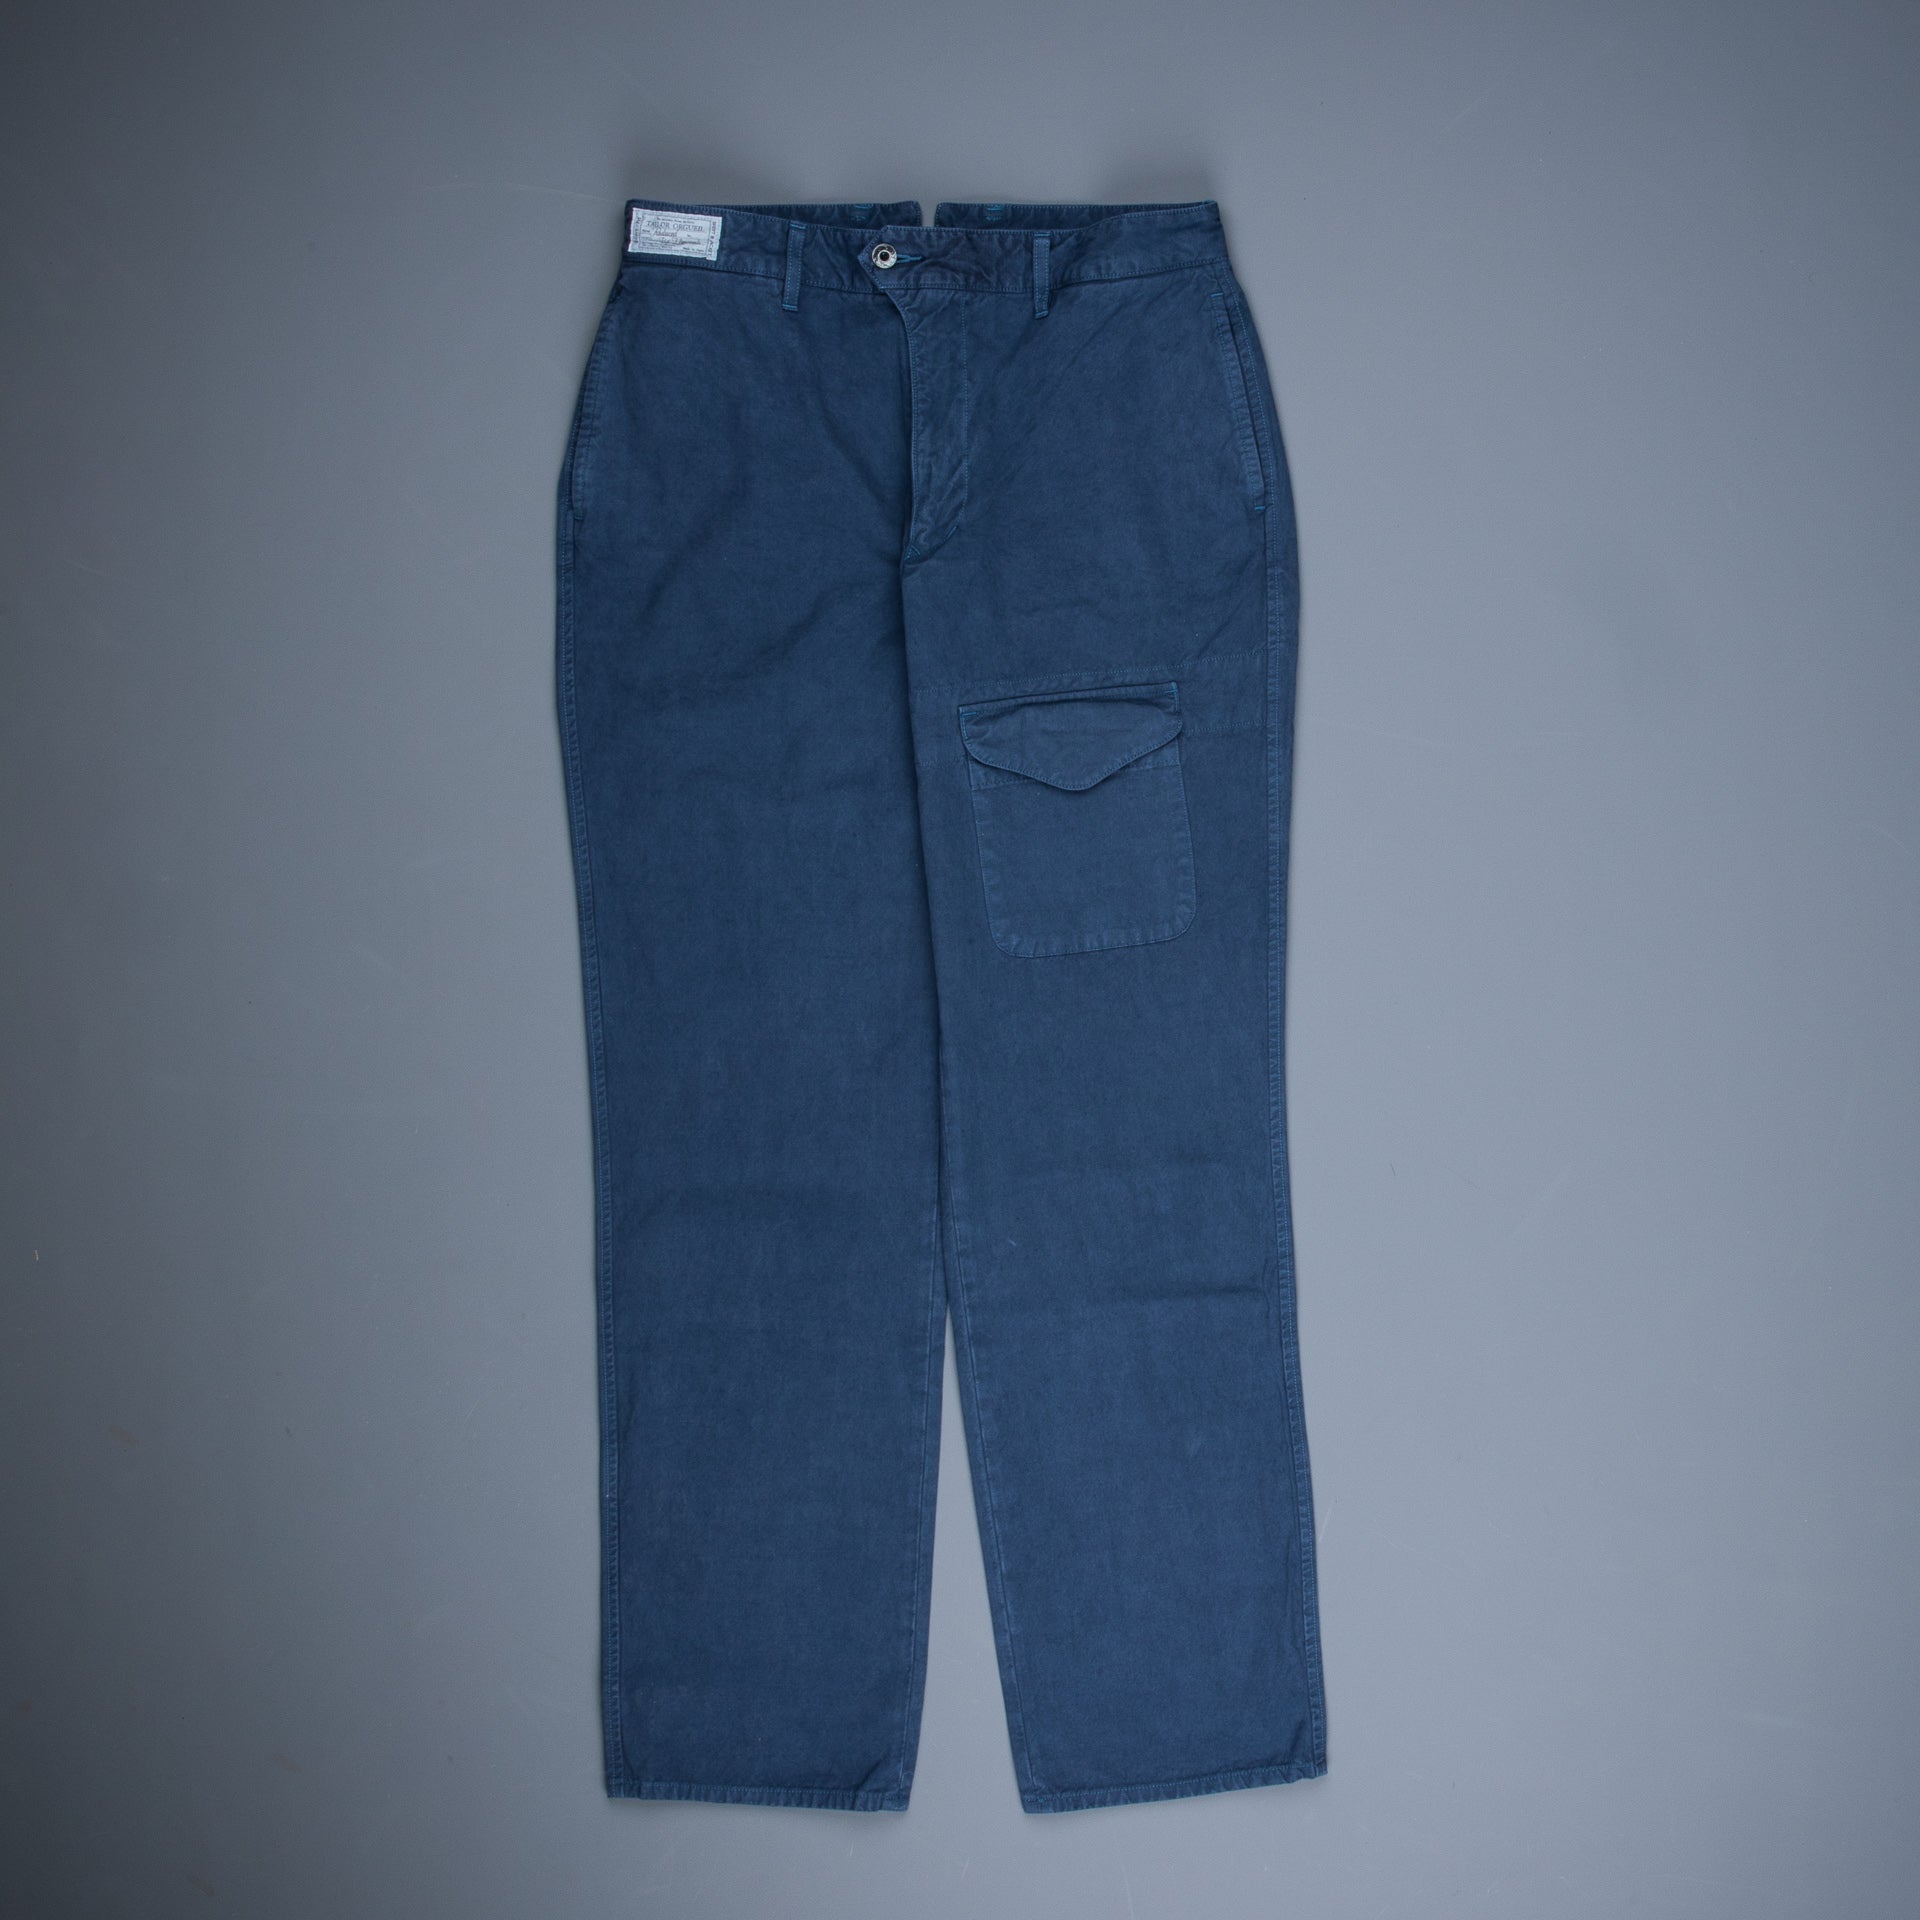 Orgueil OR-1084 British army Trousers Blue